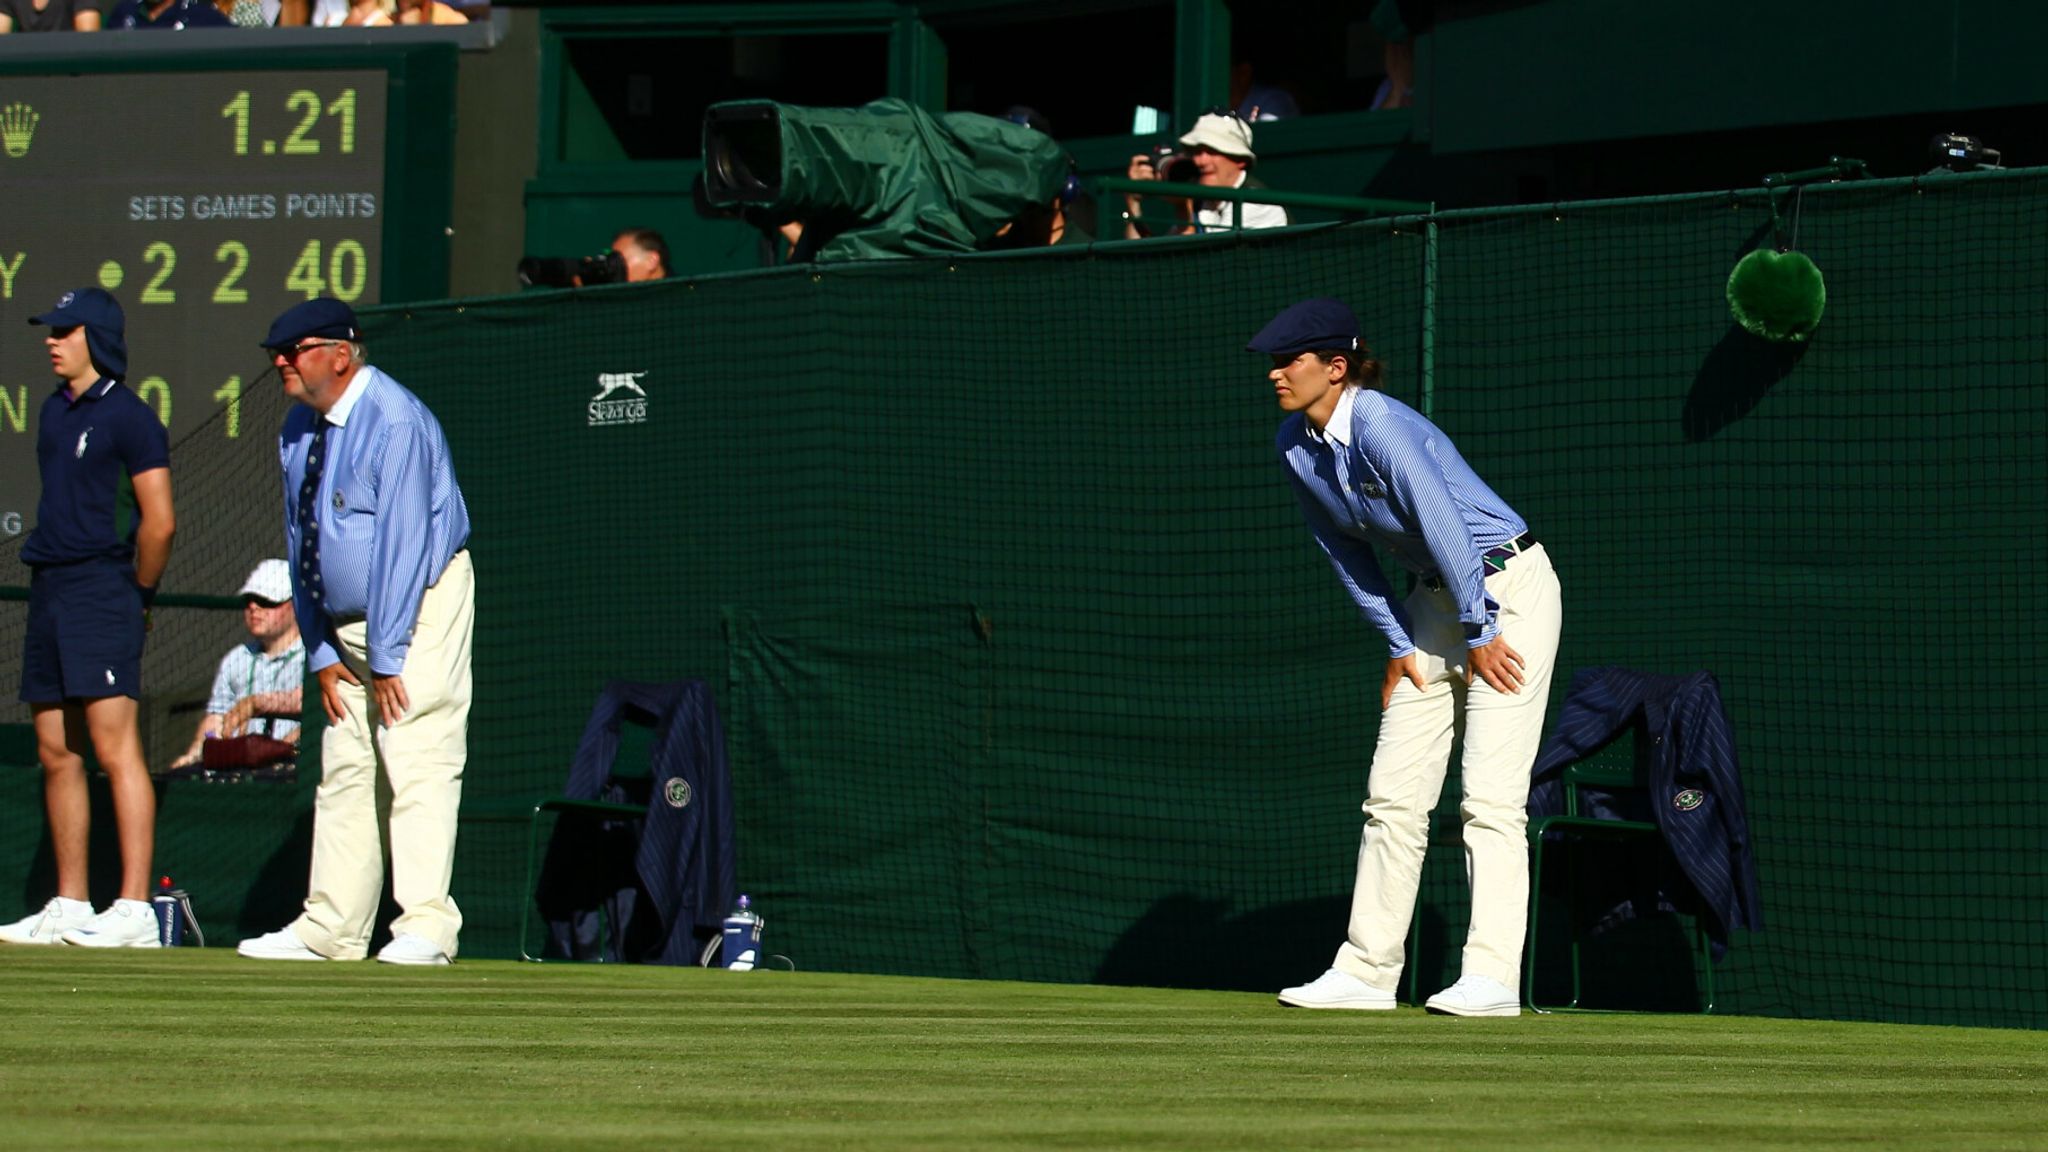 Wimbledon consider replacing line judges with an automated system for 2021 event Tennis News Sky Sports